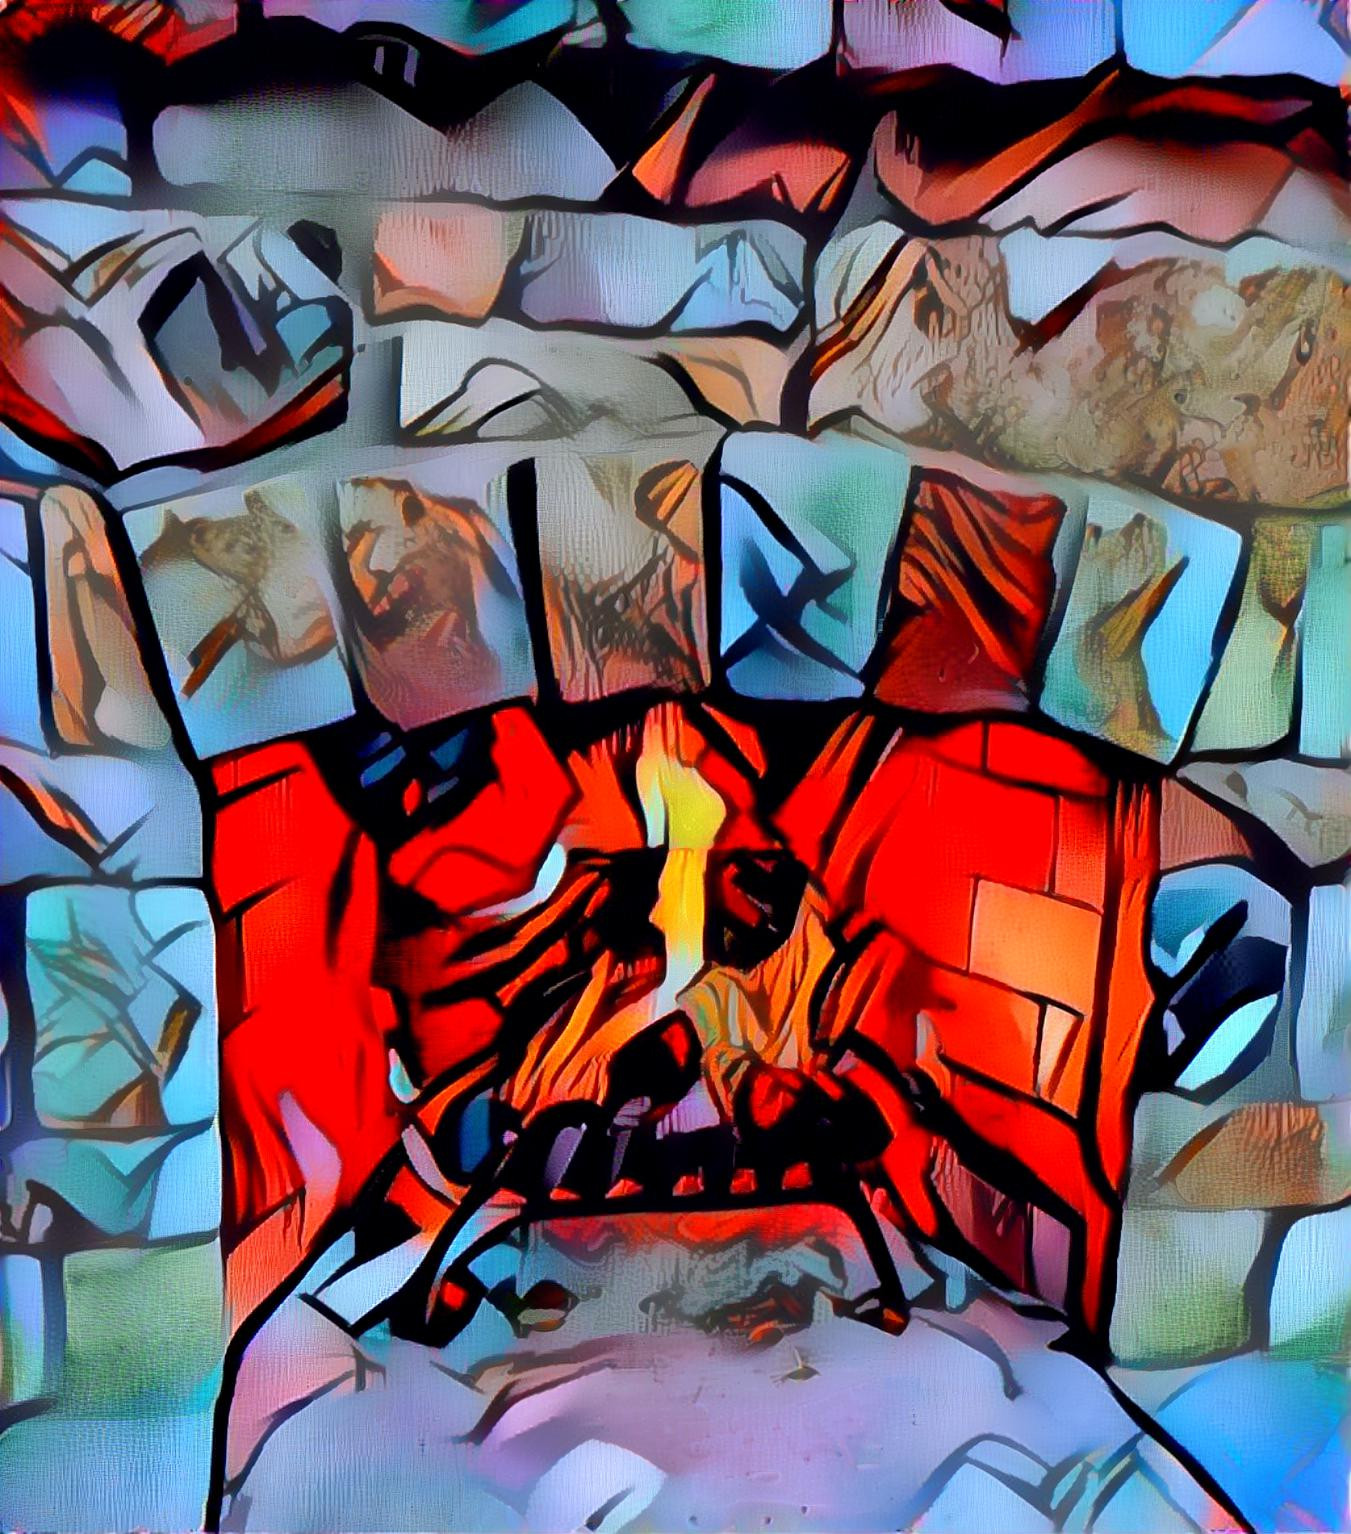 Faces in the fire